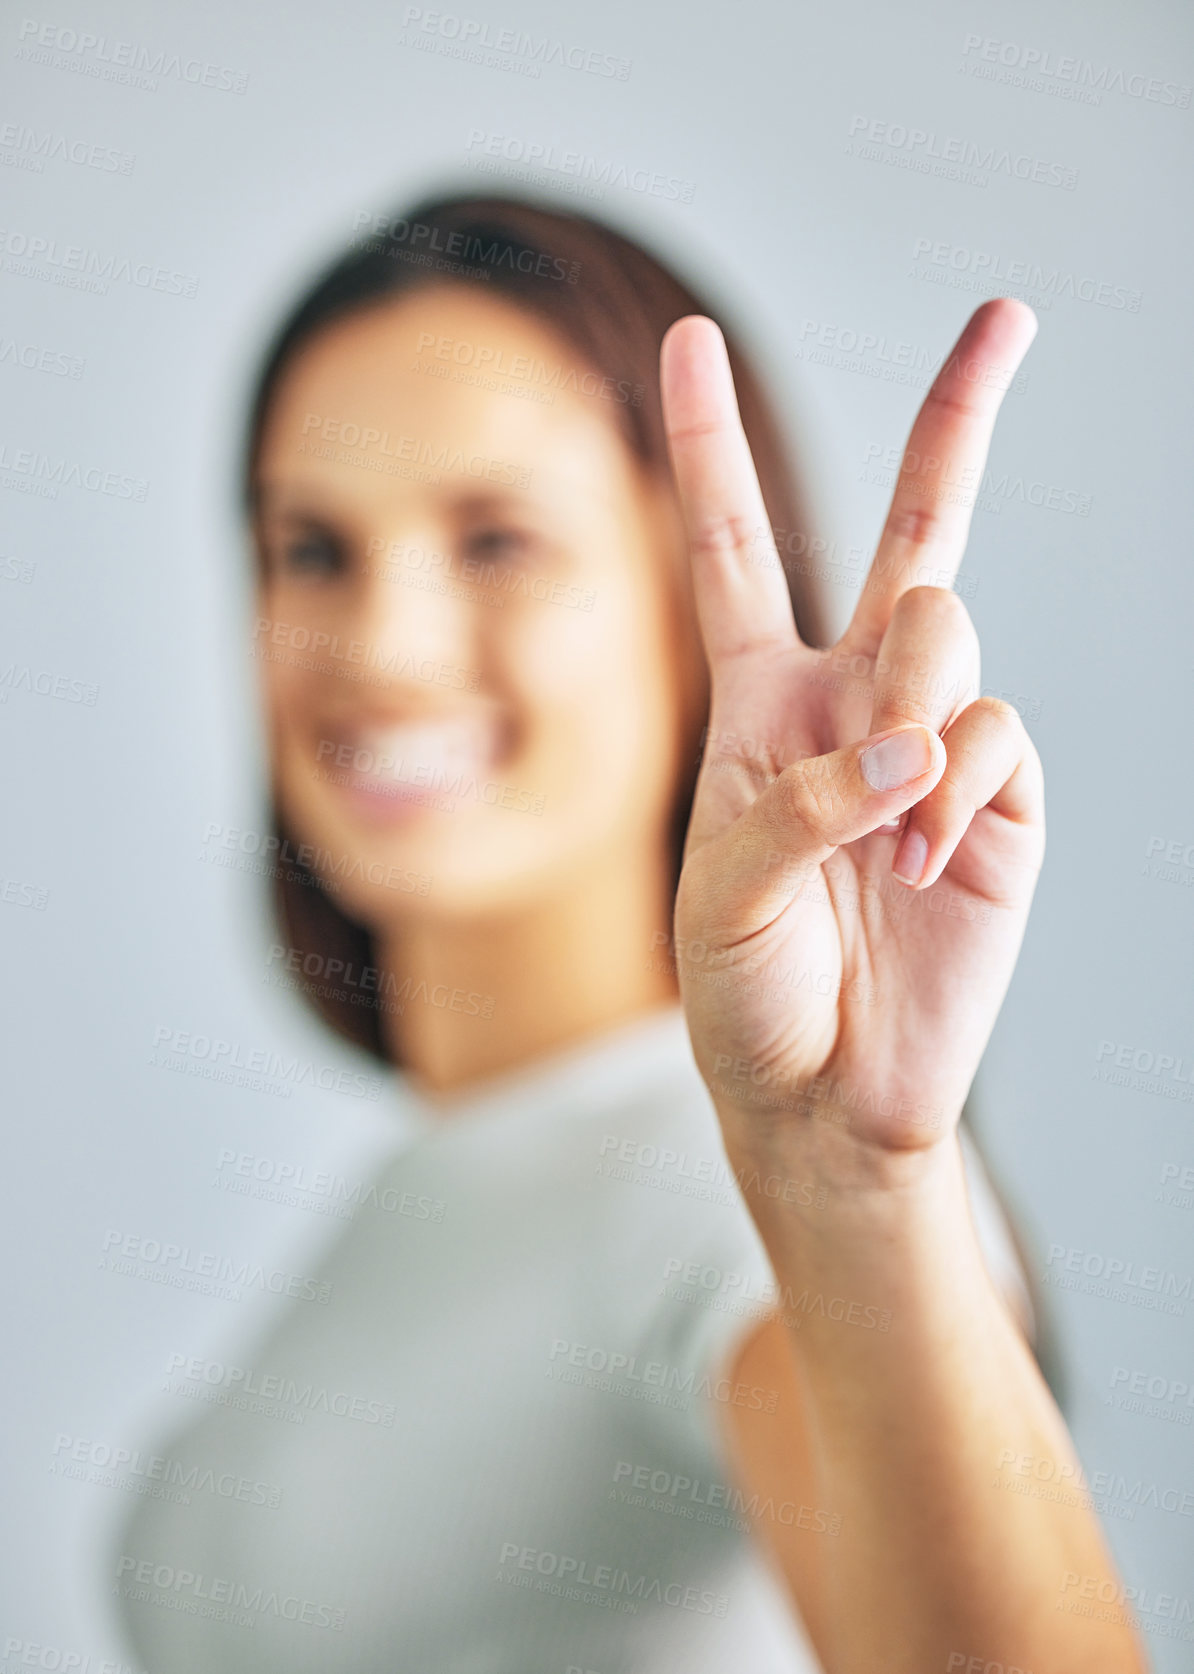 Buy stock photo Studio shot of a young woman showing the peace sign against a grey background.